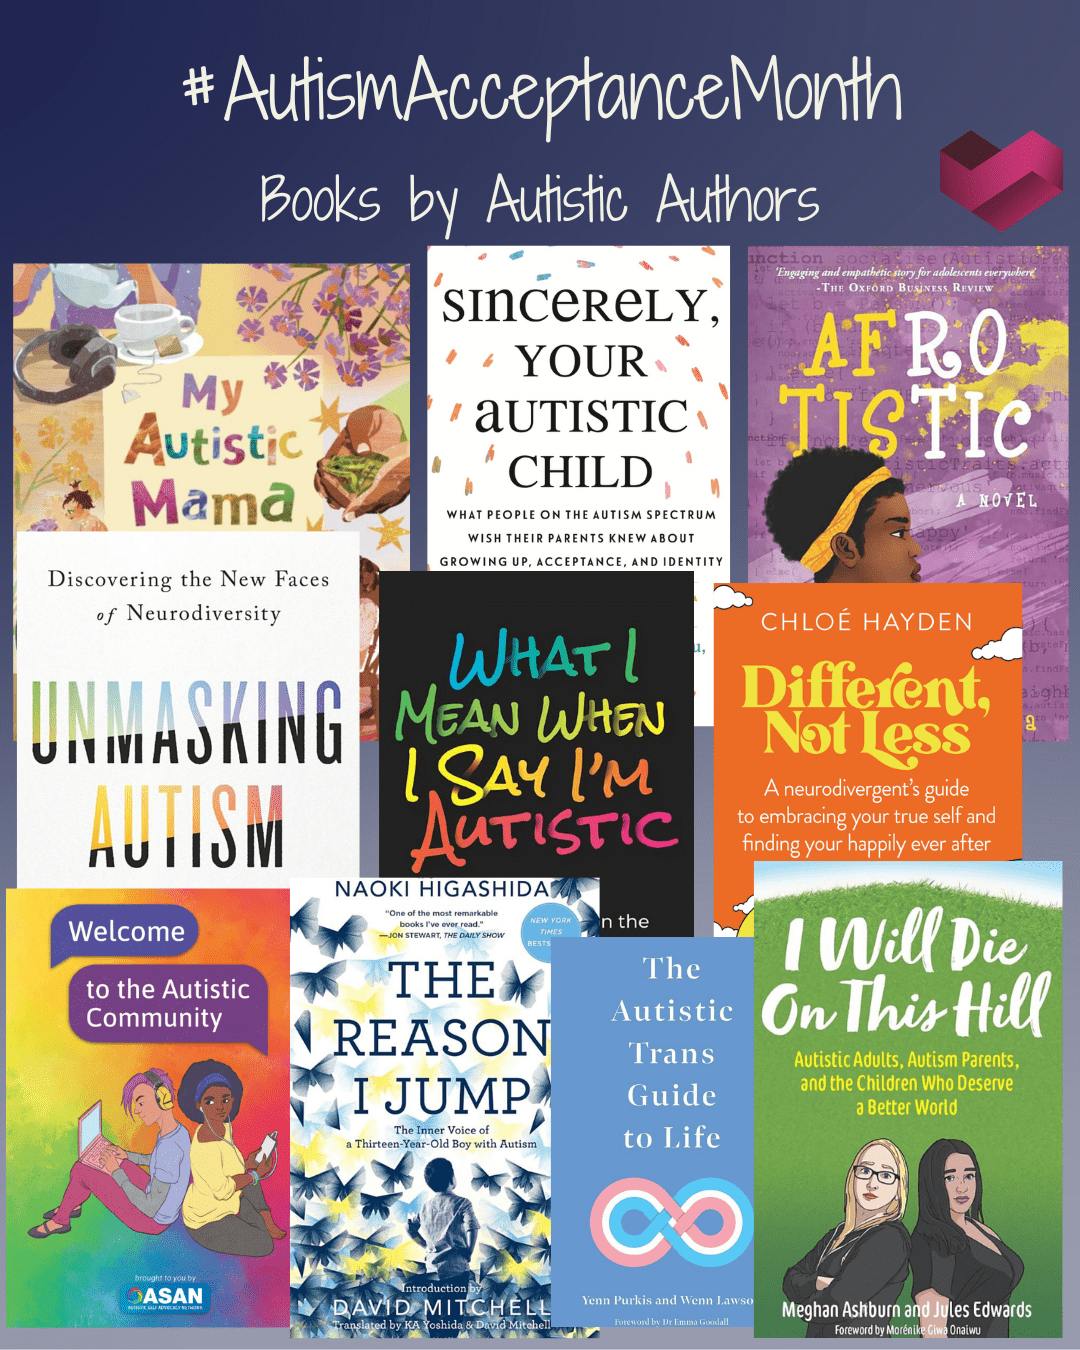 Image 1: Books by Autistic Authors Titles include: My Autistic Mama by Kati Hirschy Sincerely, Your Autistic Child by Autistic Women and Nonbinary Network Afrotistic by Kala Allen Omeiza Unmasking Autism by Devon Price What I Mean When I Say I'm Autistic by Annie Kotowicz Different, Not Less by Chloe Haydon Welcome to the Autistic Community by Lar Berry and The Autistic Self Advocacy Network The Reason I Jump by Naoki Higashida The Autistic Trans Guide to Life by Yenn Purkis and Wenn B. Lawson I Will Die On This Hill by Jules Edwards and Meghan Ashburn